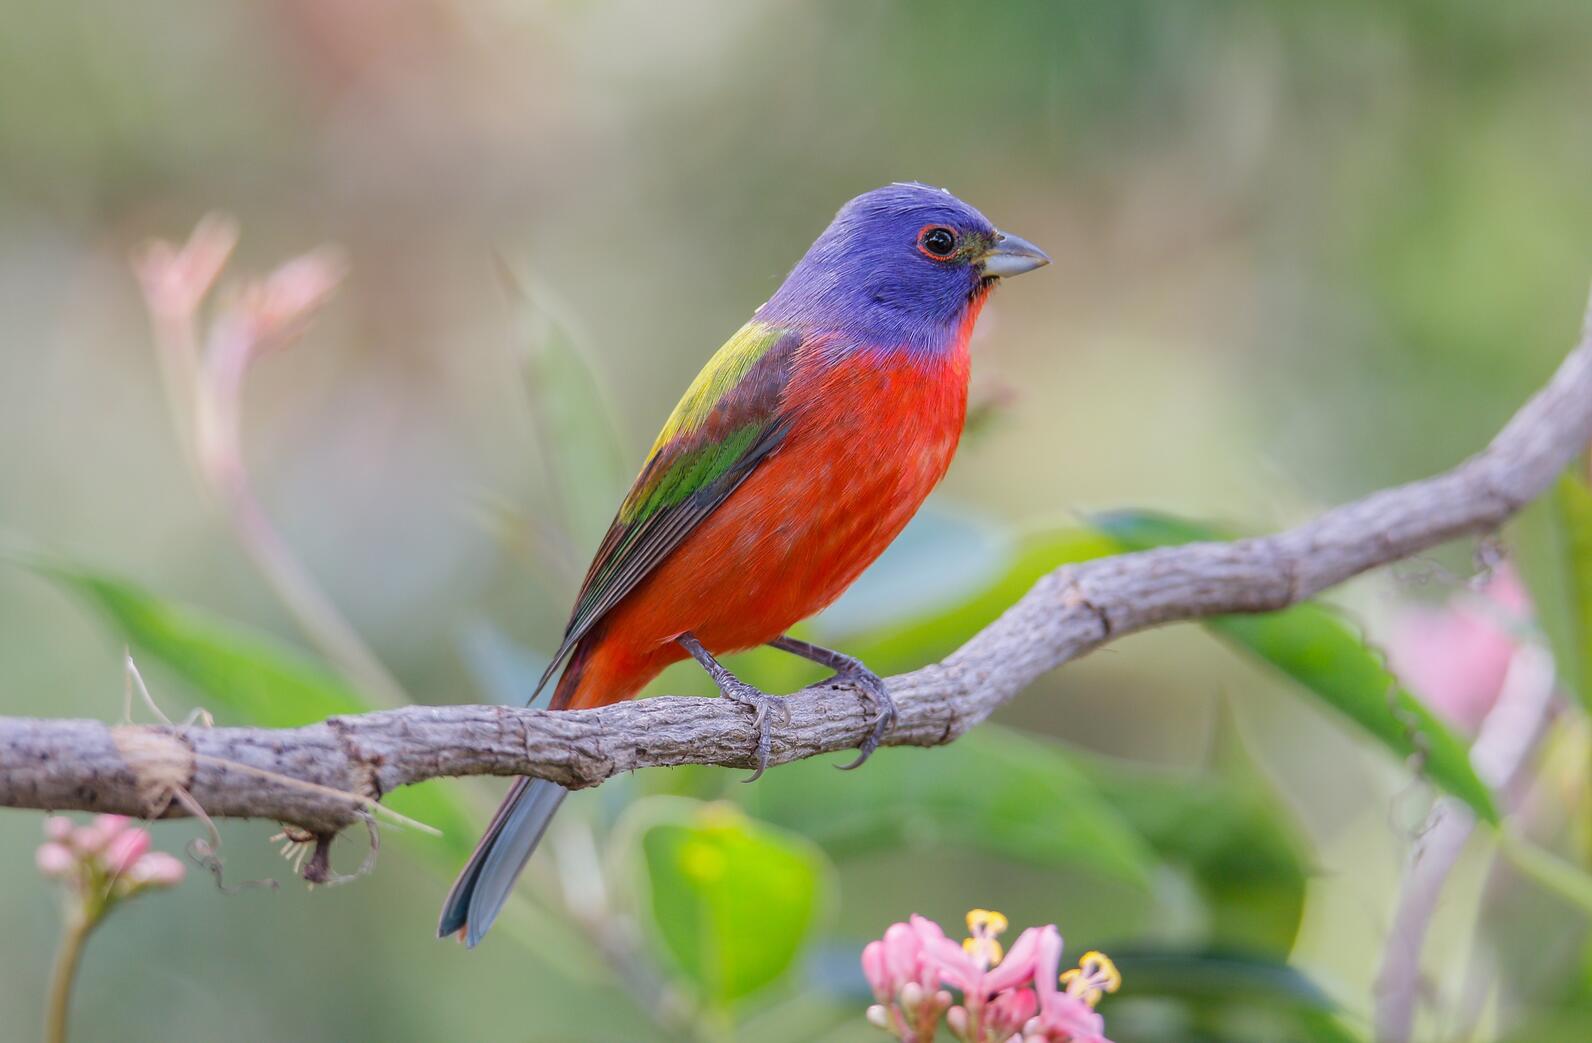 Male painted bunting with technicolor plumage. A red breast, eye ring, and rump. Blue head and yellow-green back. This bird is perched on a thin branch lower to the ground with blooming pink flowers below the bird. 